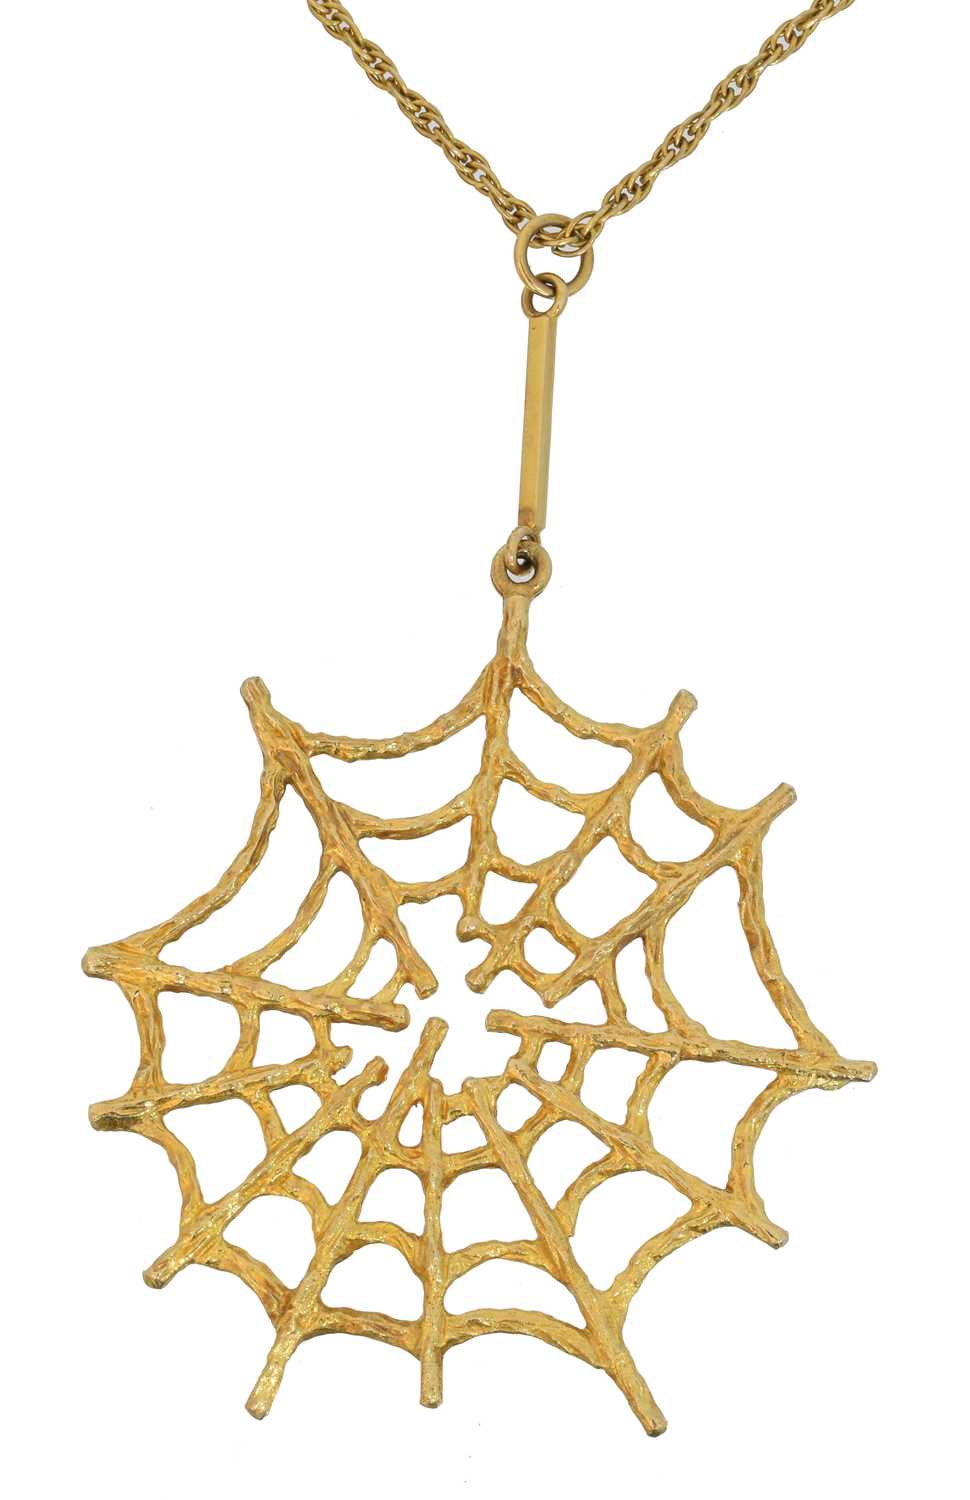 Lot 112 - A 9ct gold spider's web pendant by Deakin & Francis